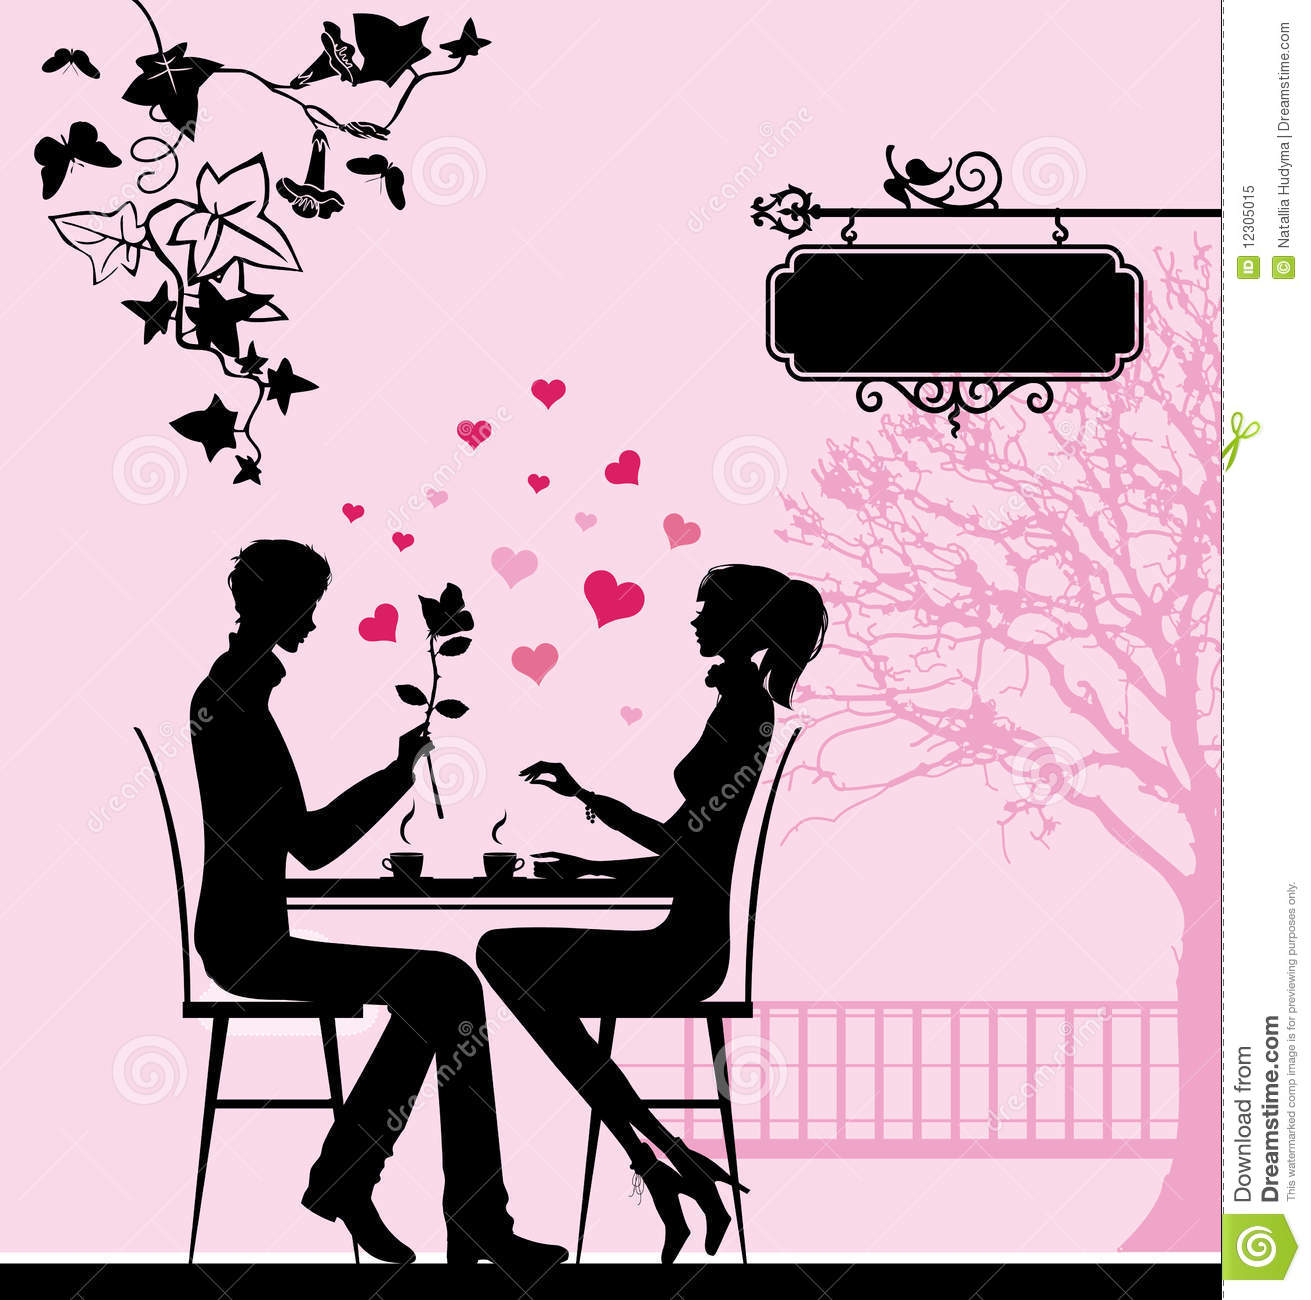 Silhouette Of The Couple In The Cafe  Royalty Free Stock Photo   Image    